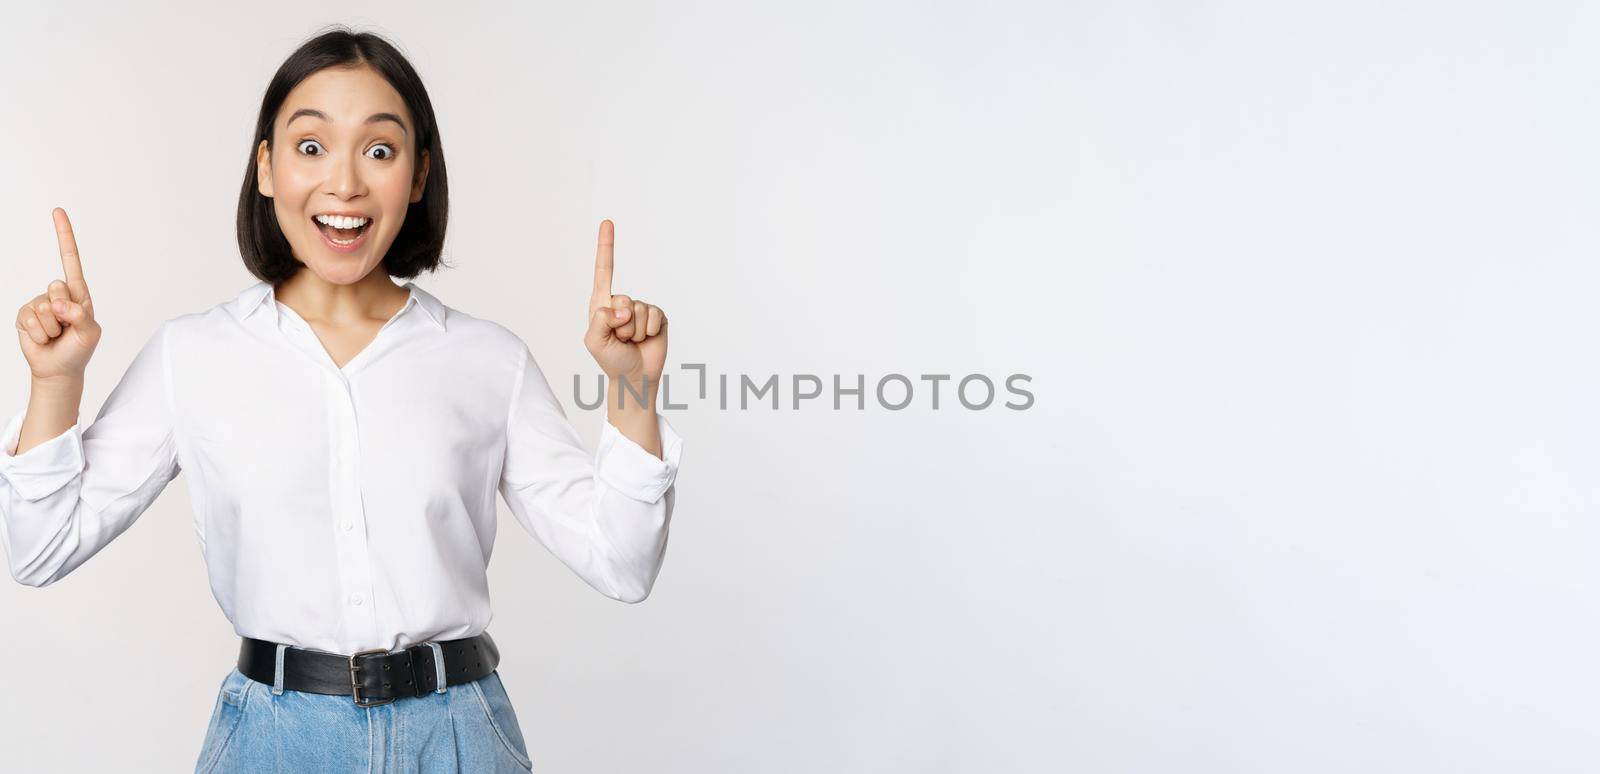 Enthusiastic business woman, asian female model pointing fingers up and smiling, making announcement, showing logo banner on top, white background.